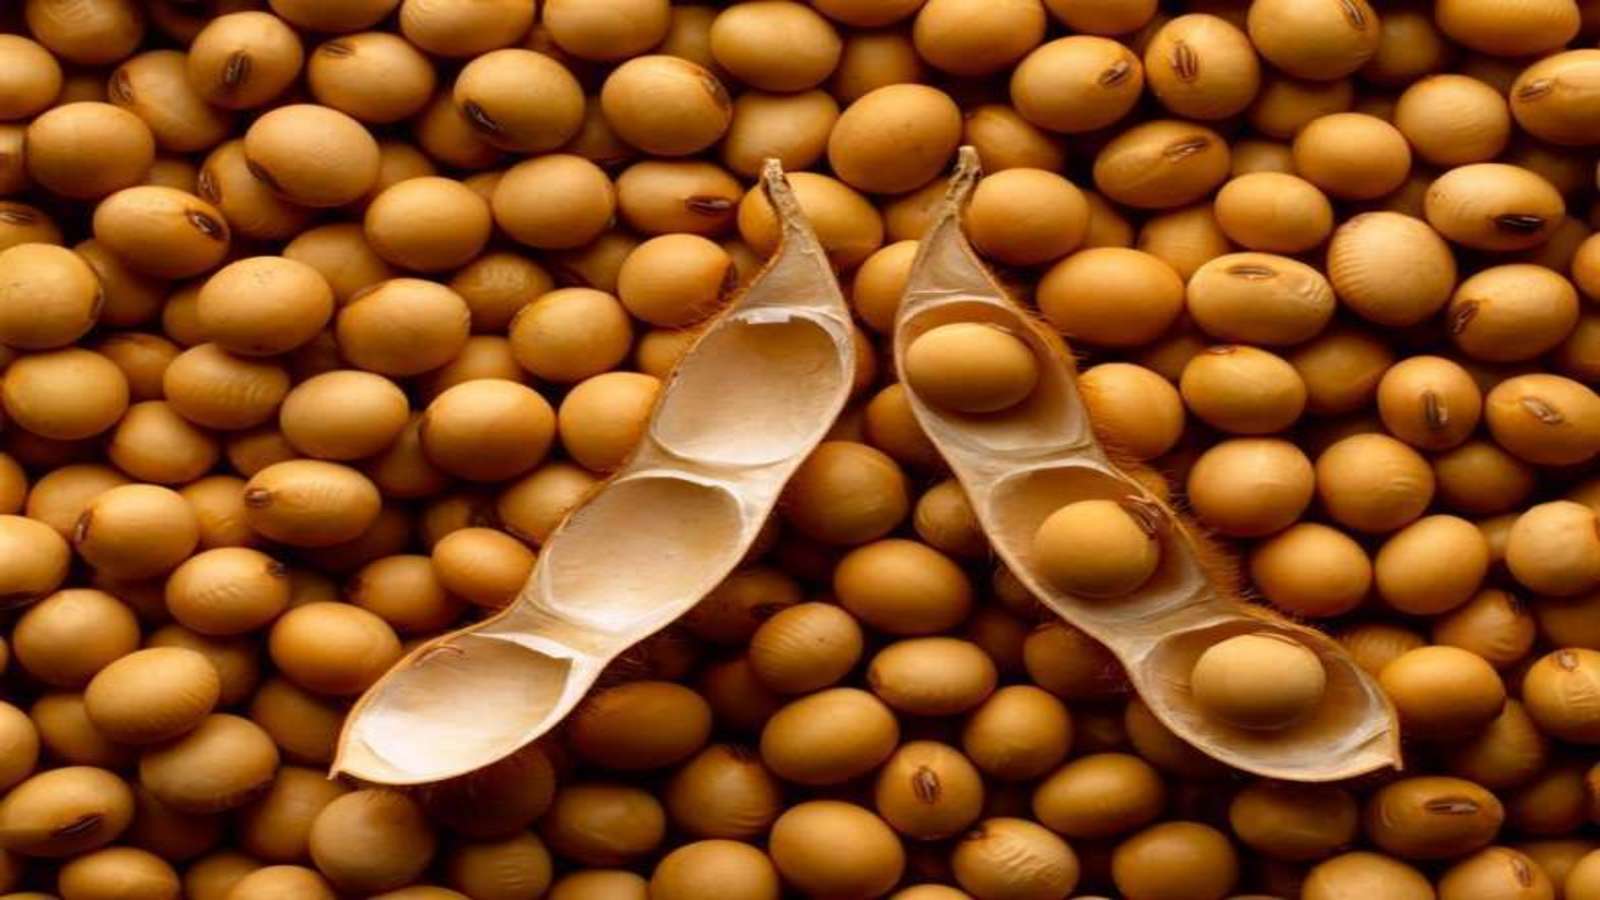 China’s GM corn, soybean obtain safety approval for production